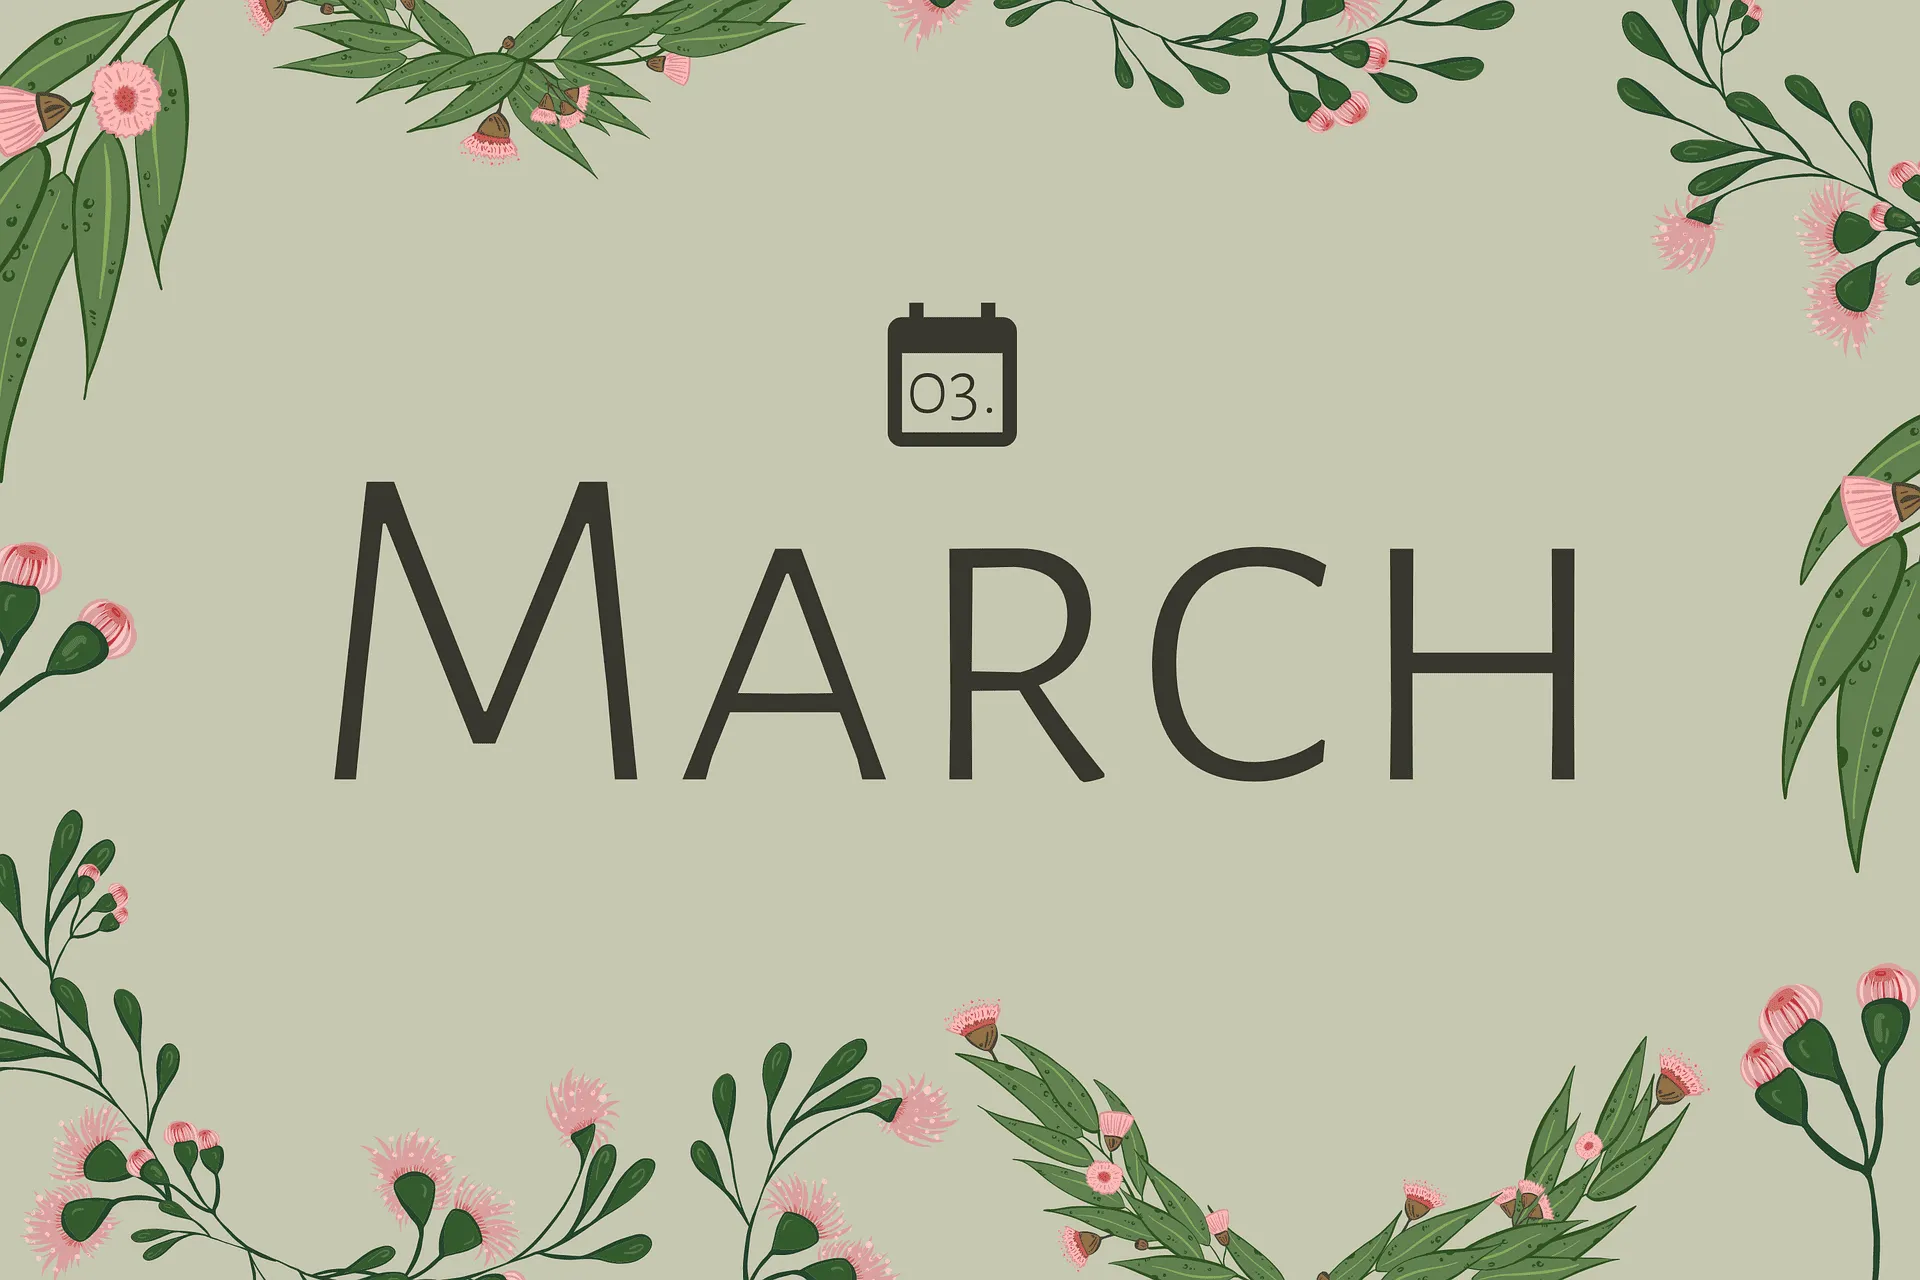 March was named after the famous Roman God of War, Mars.